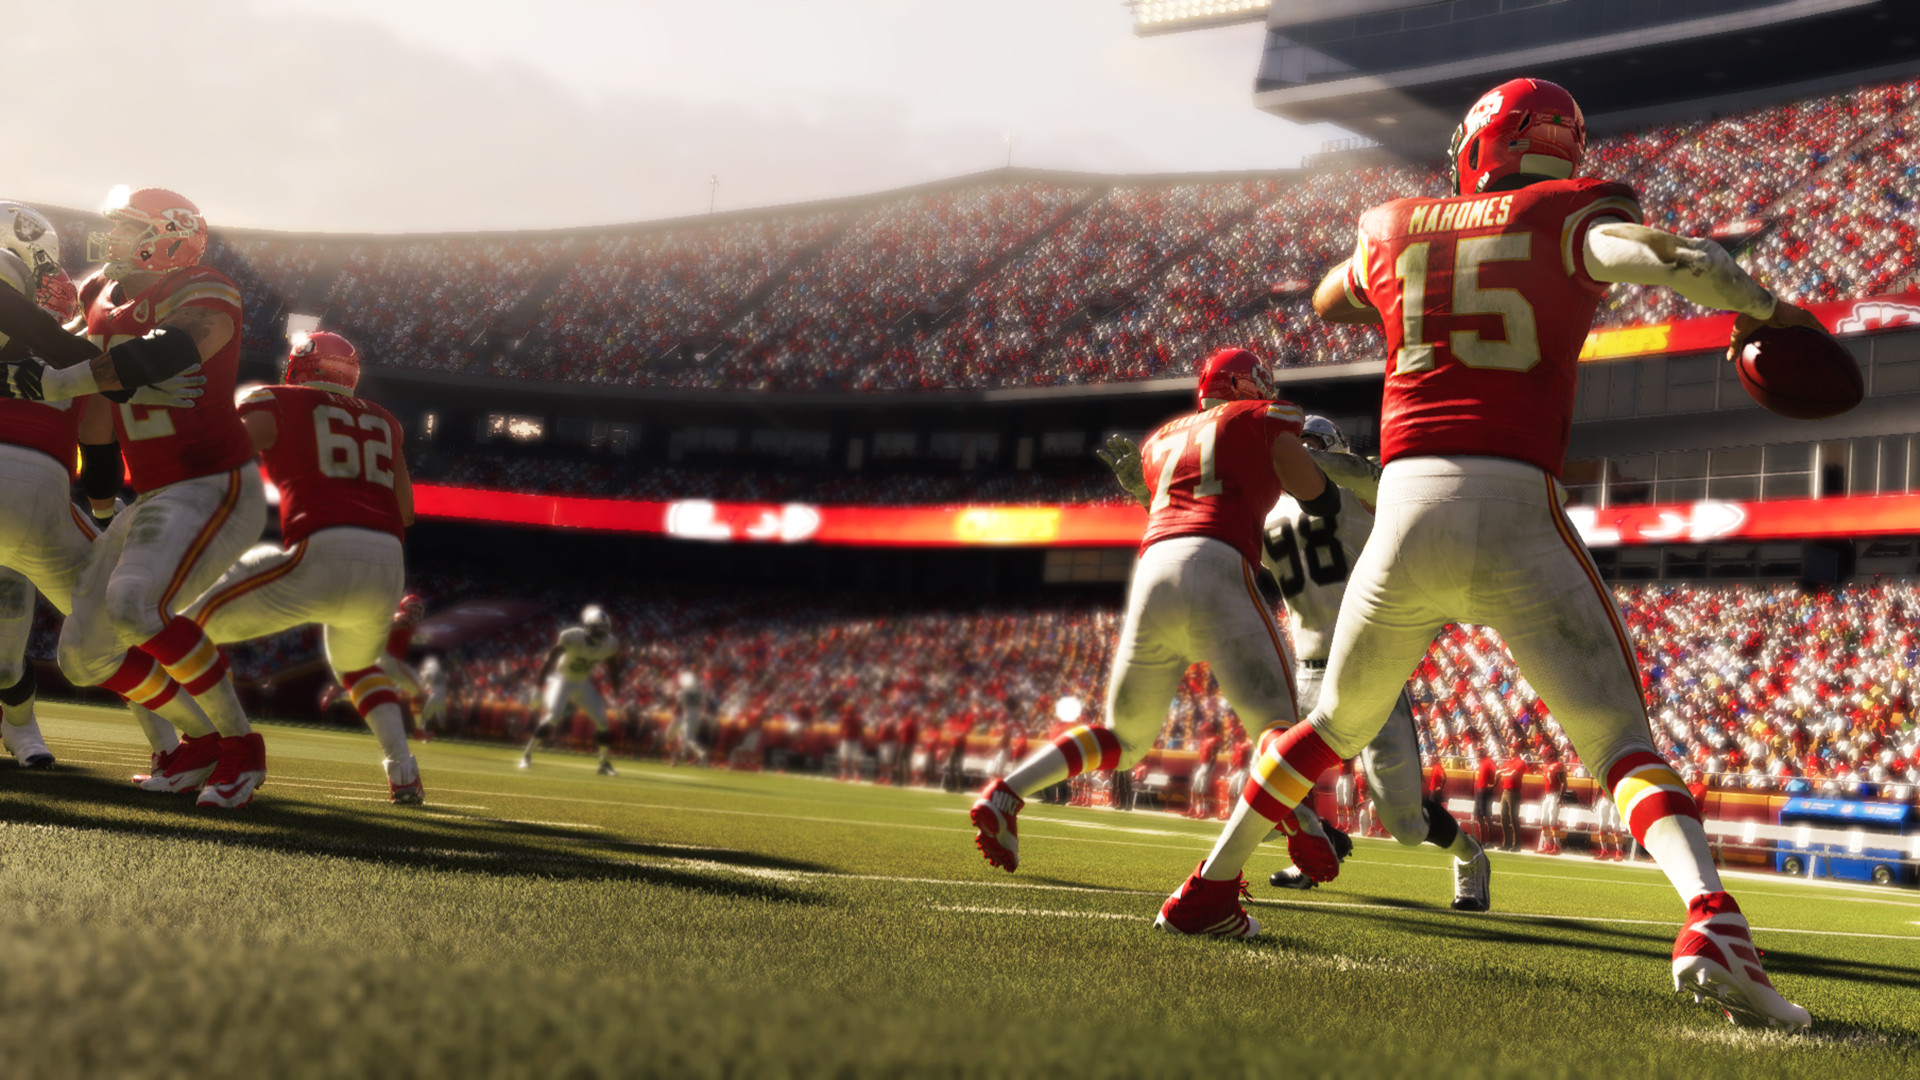 madden nfl 21 early release date